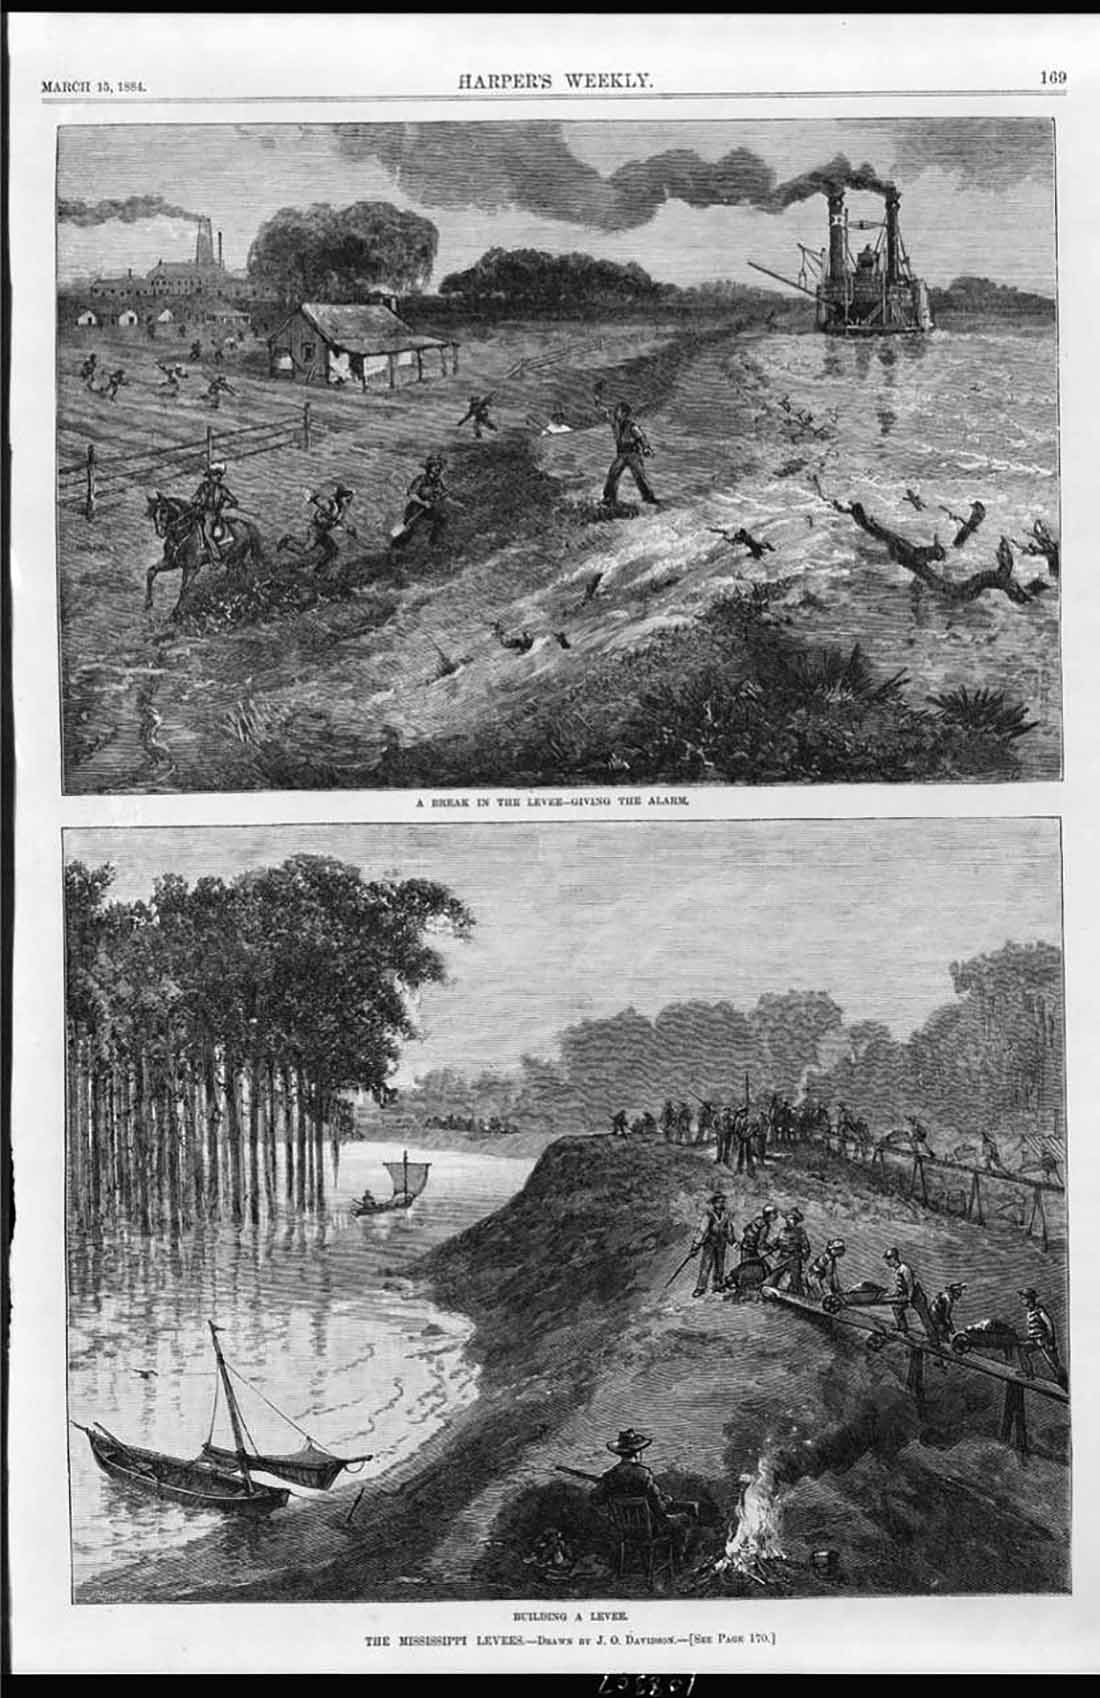 Black and white illustration (top) possibly of the the 1882 Mississippi River flood which cost more than 20,000 people their homes, (bottom) Prison laborers, likely African-American, are forced to rebuild a levee along the Mississippi River, an overseer with a shot gun is seen in the foreground from Harper’s Weekly, 1884.